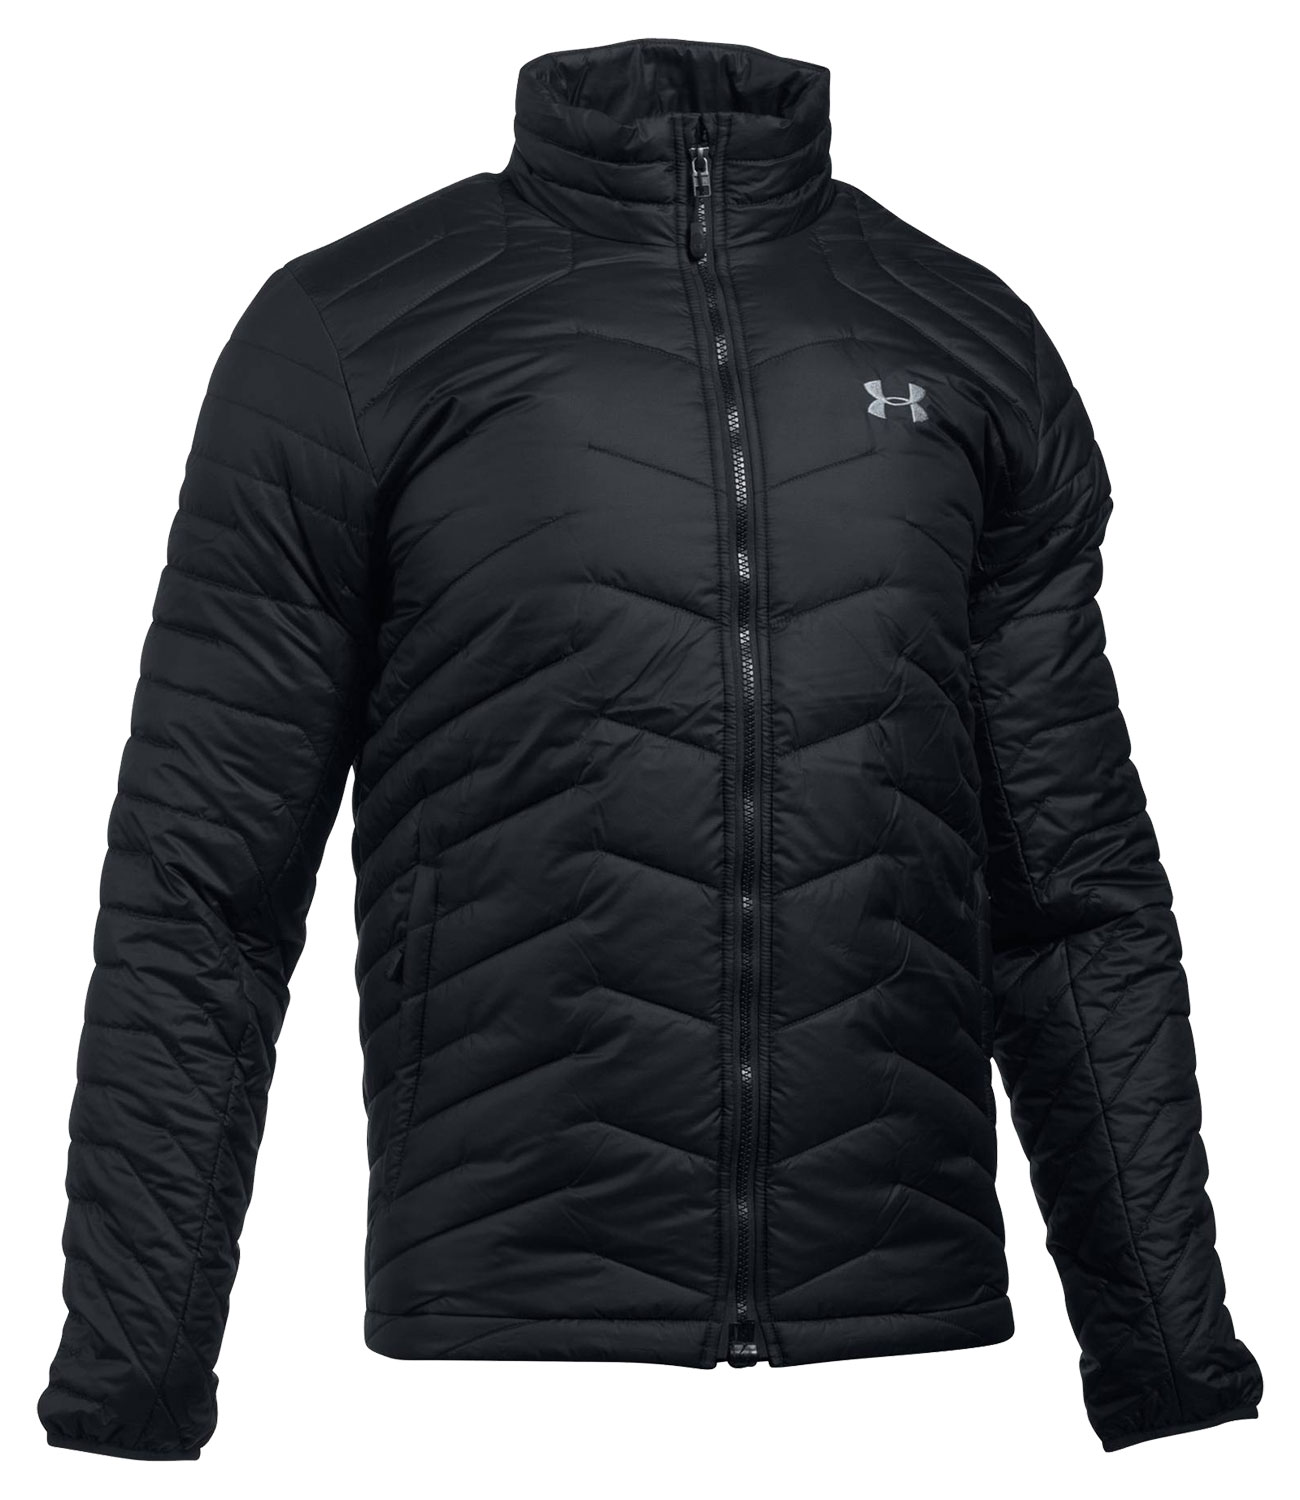 under armour 1306194 jacket snrc99